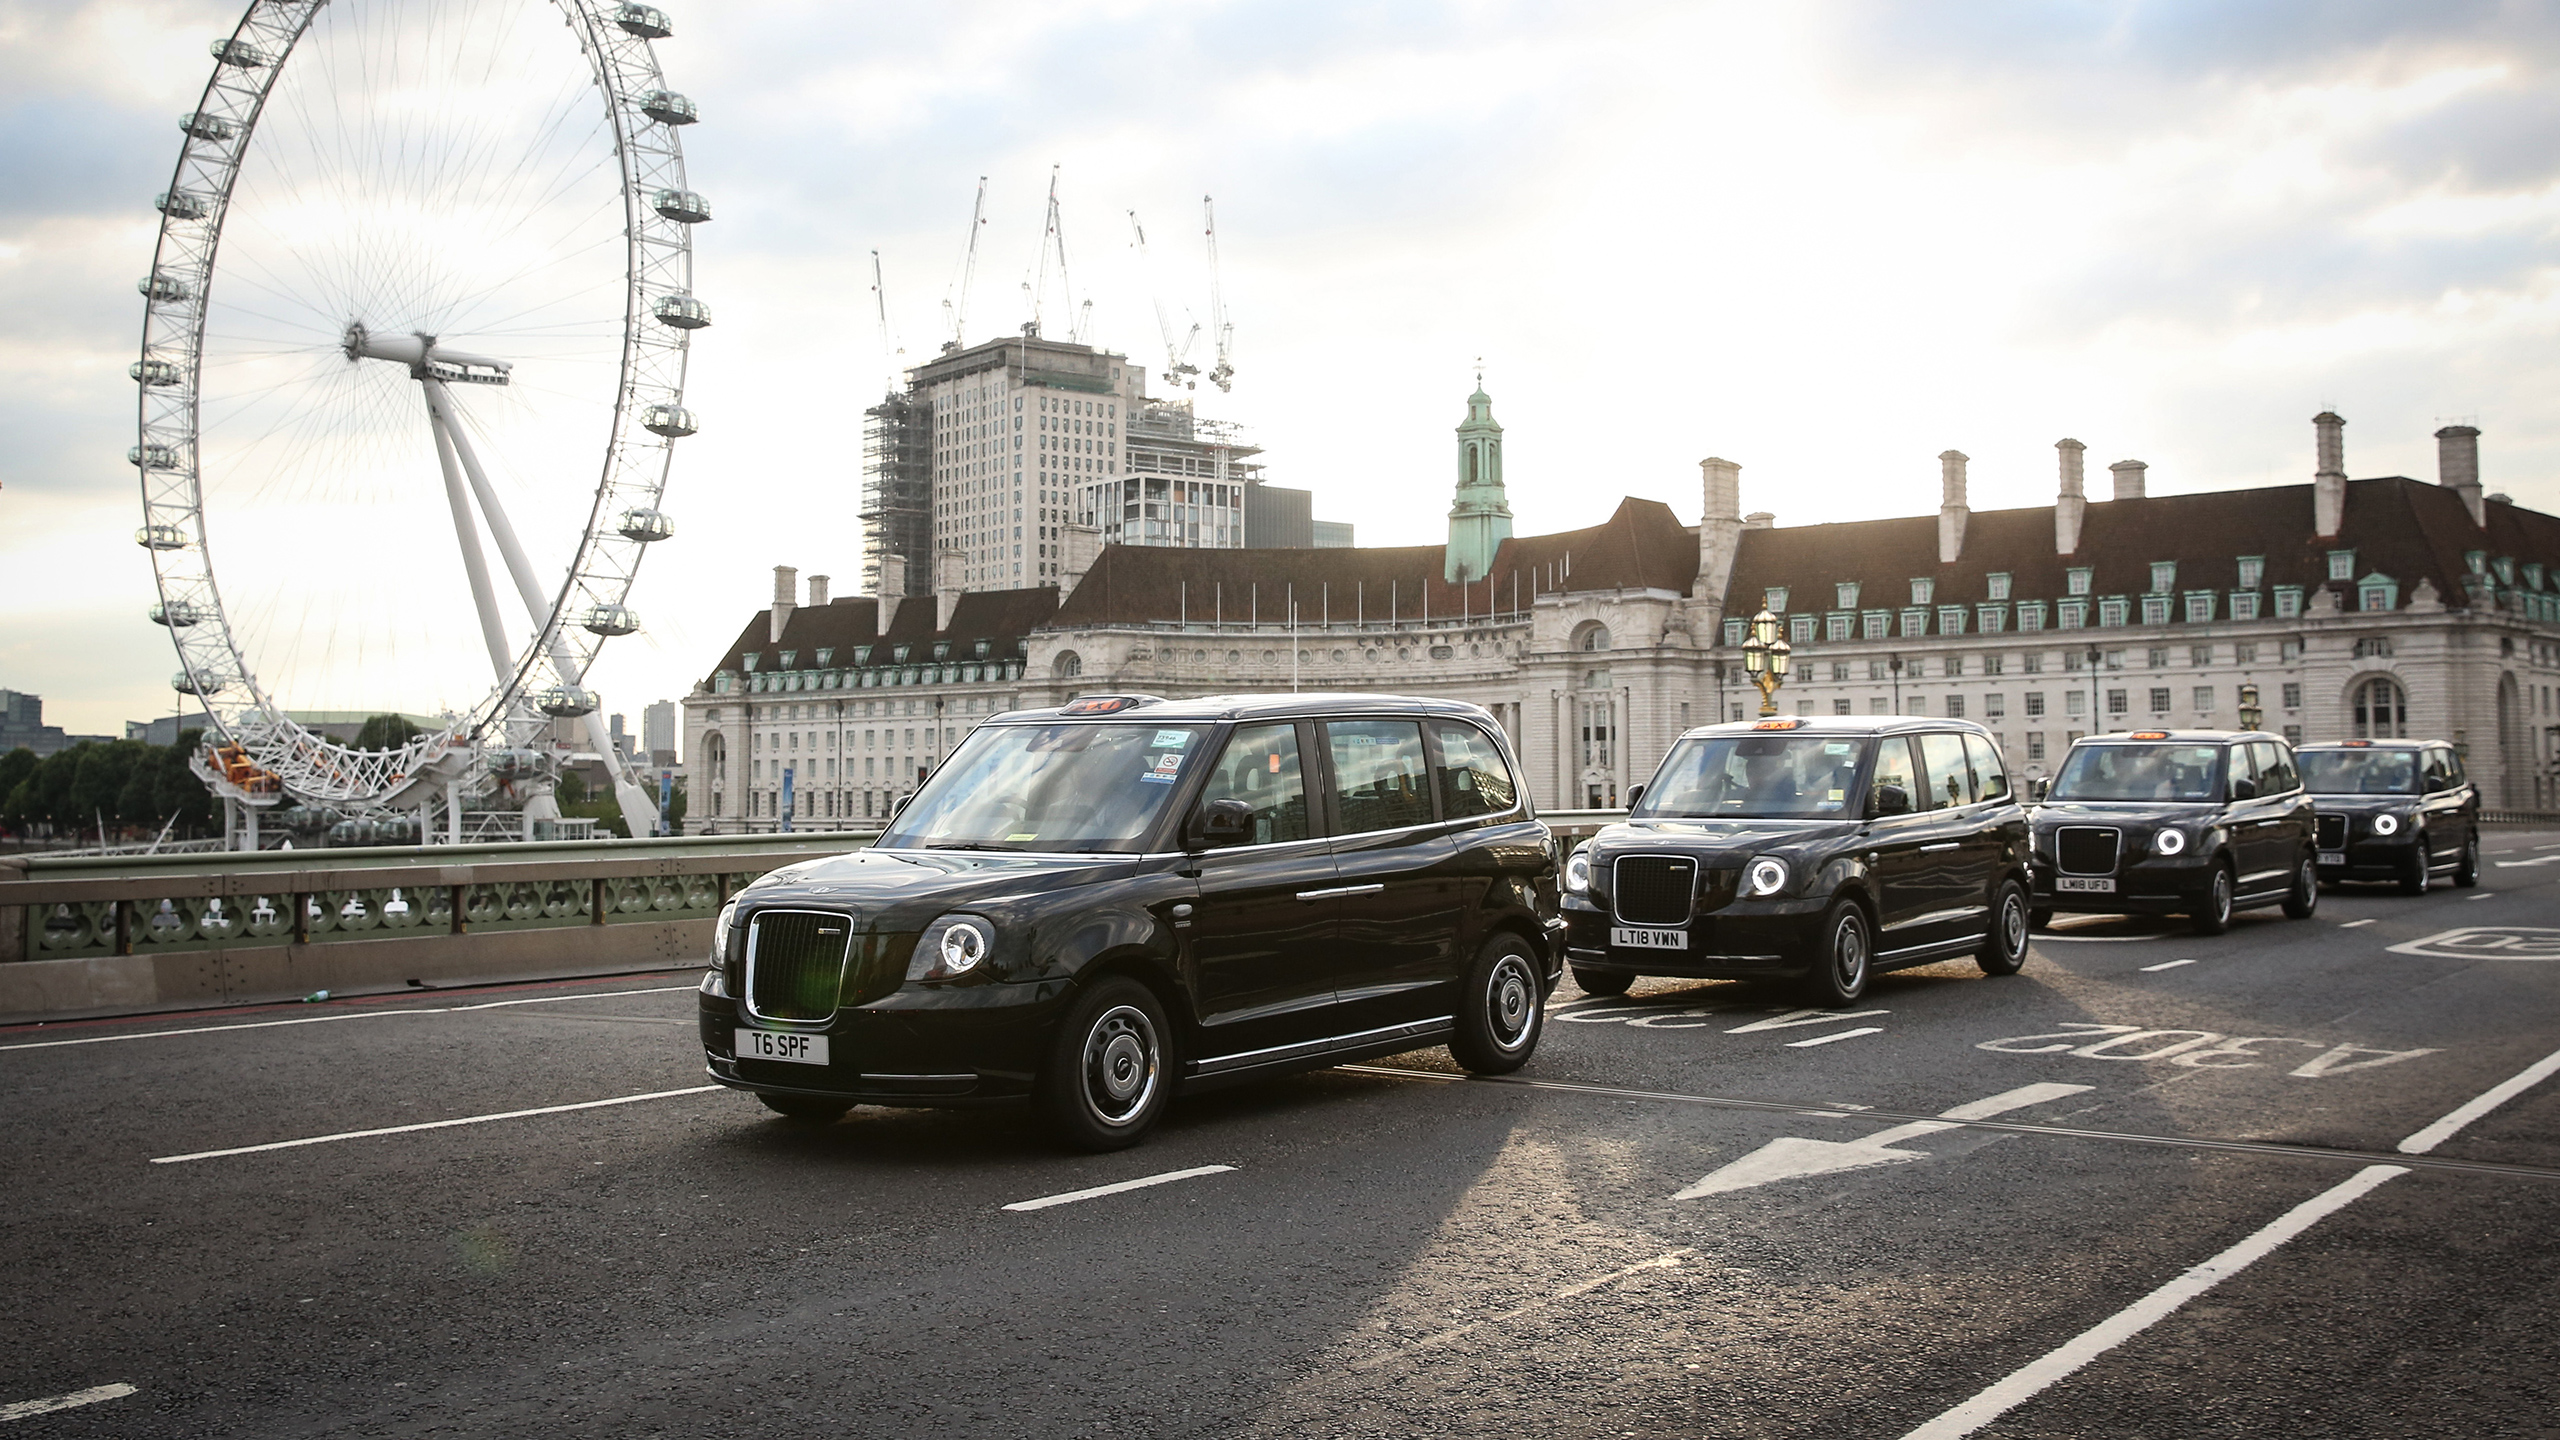 LEVC – from taxi manufacturer to leading manufacturer of electric vehicles (Photo: LEVC)